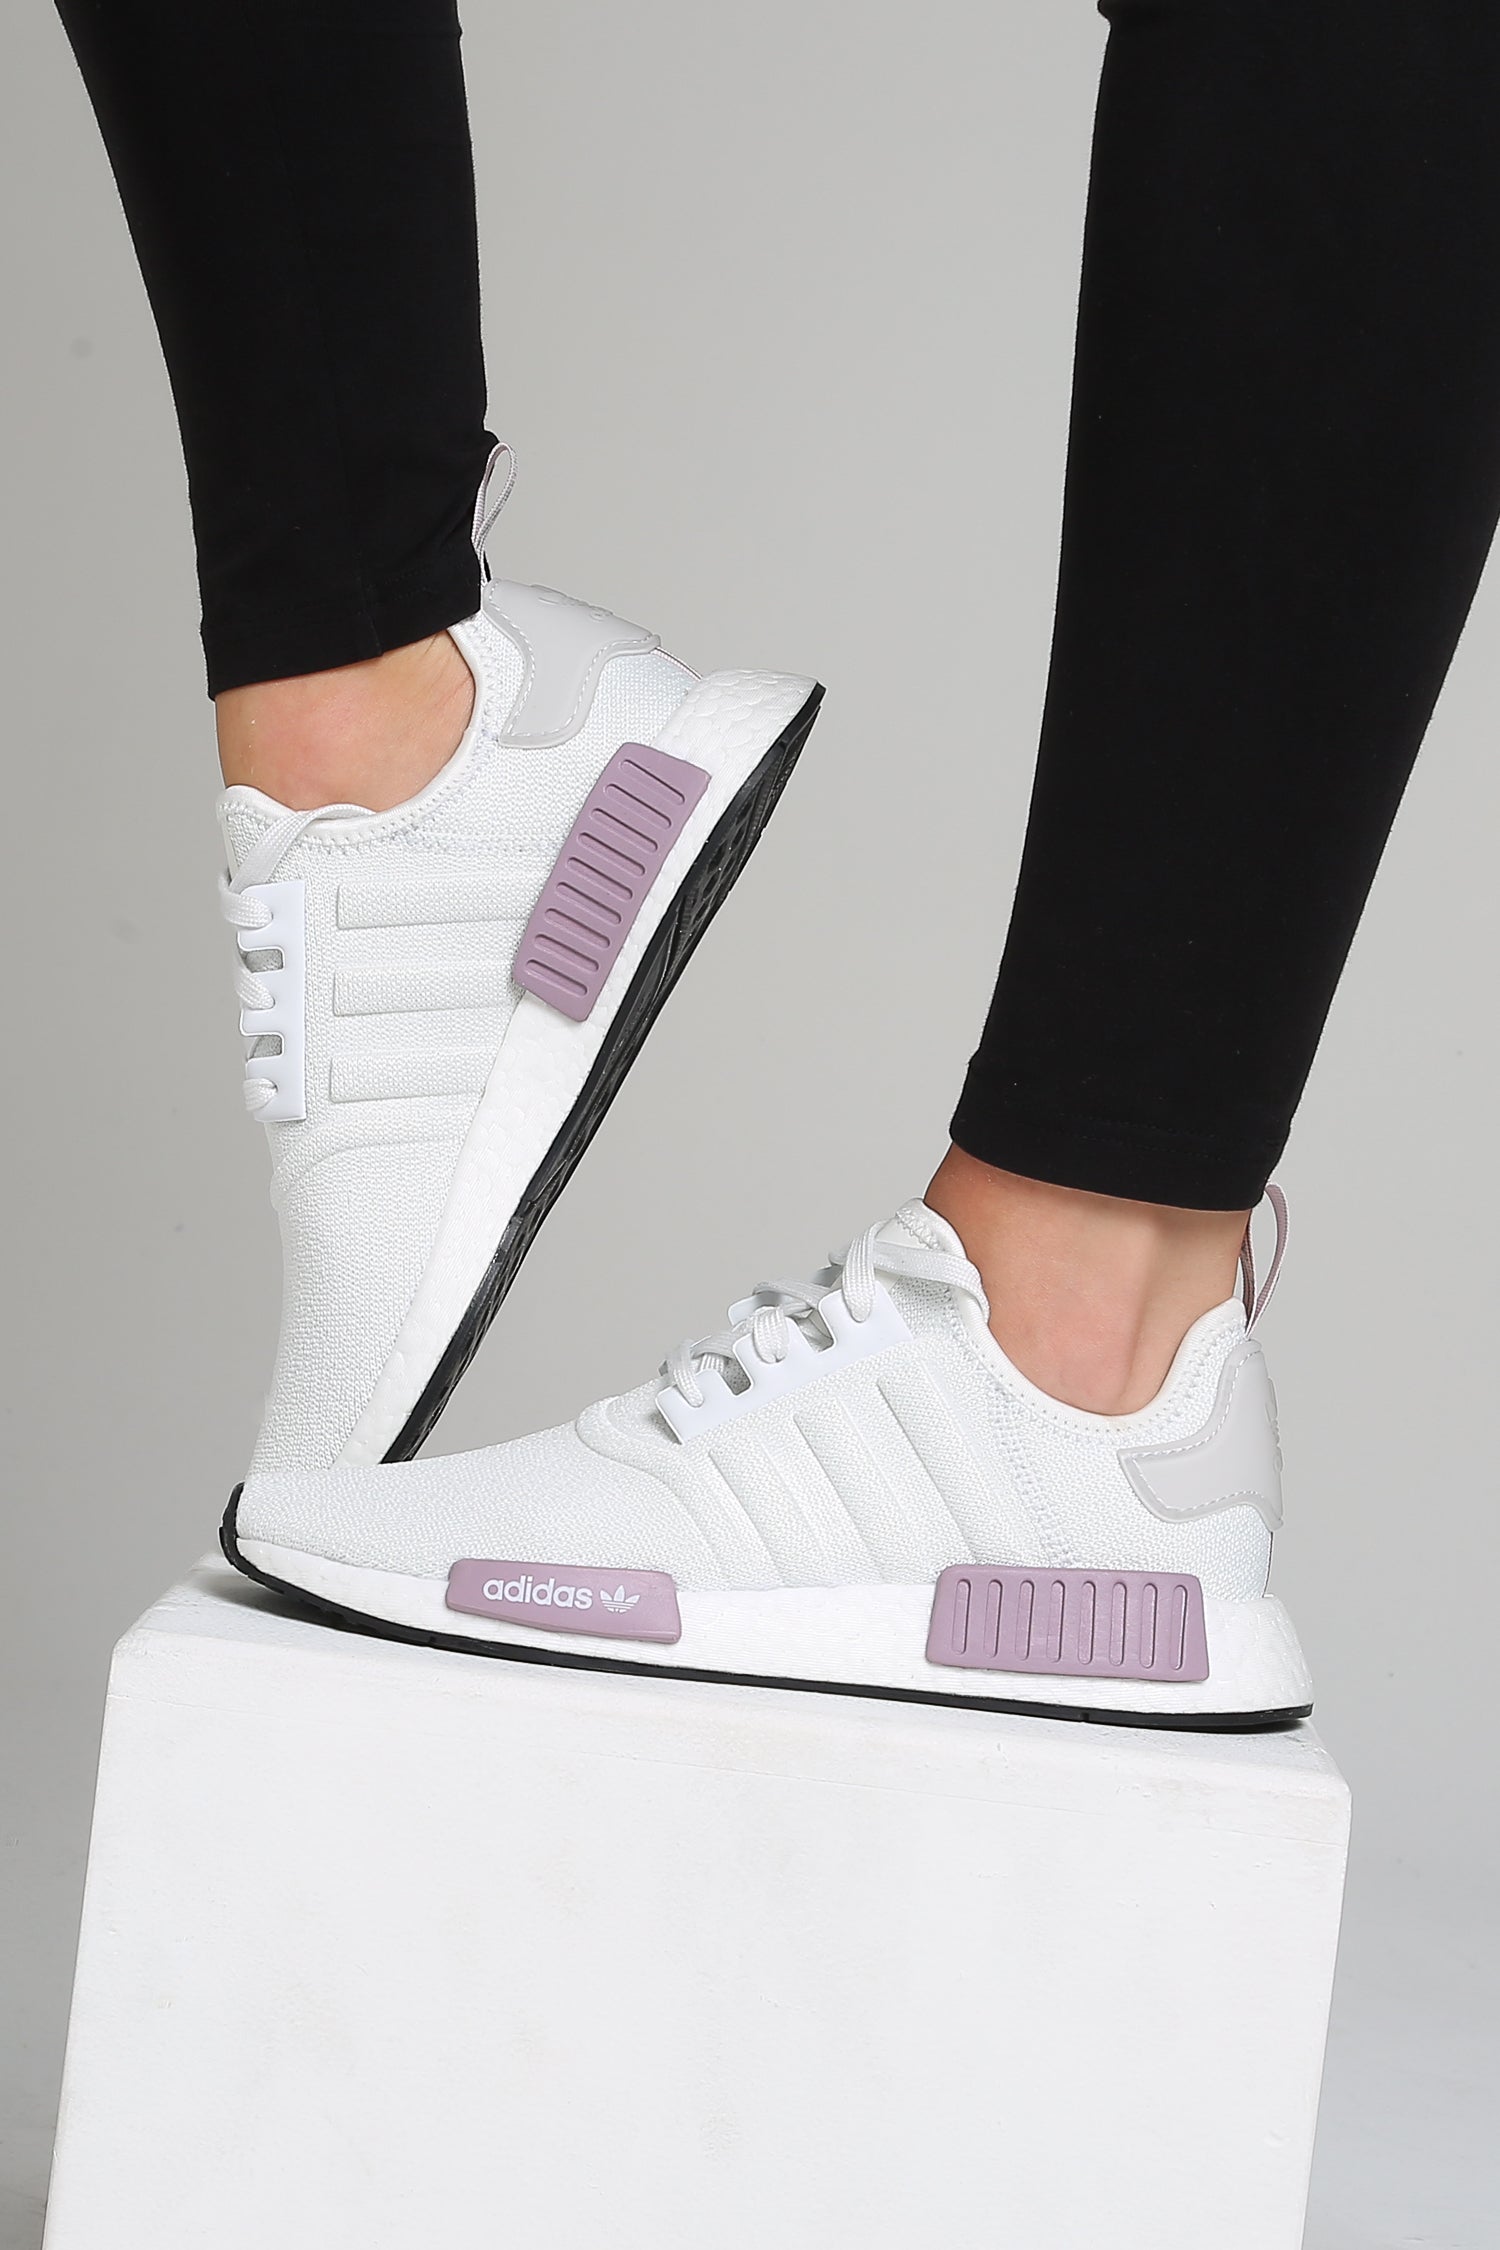 white nmds with purple